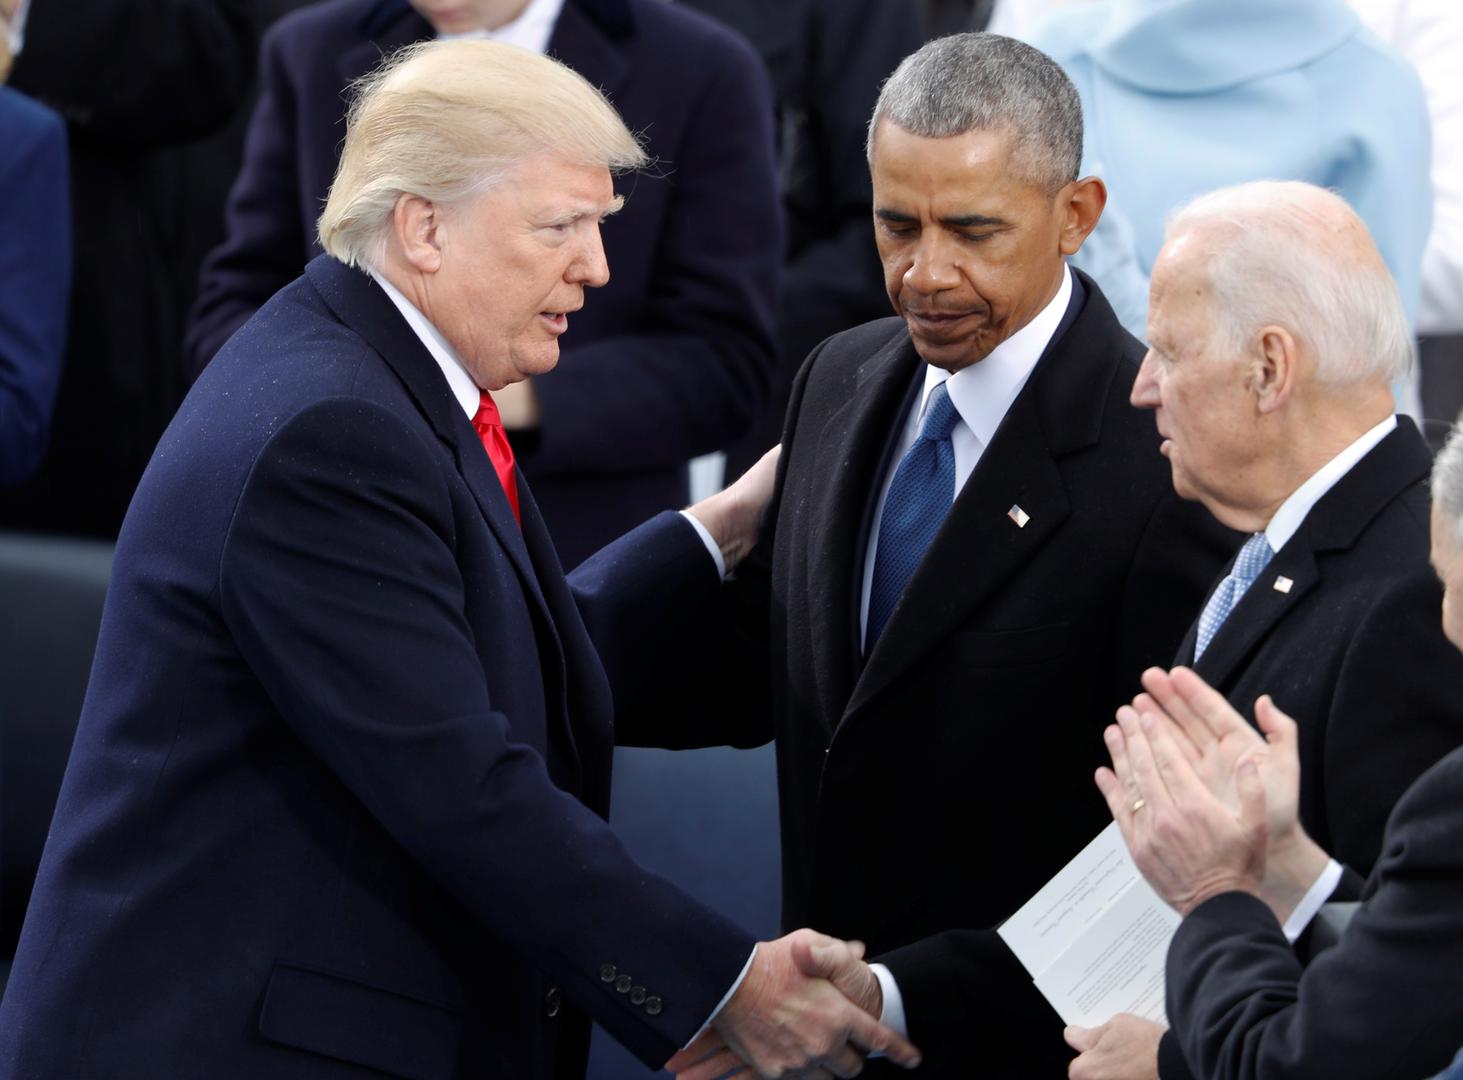 FILE PHOTO: U.S. President Donald Trump greets former Vice President Joe Biden and former President Barack Obama after being sworn in as president of the United States at U.S. Capitol in Washington FILE PHOTO: U.S. President Donald Trump greets former Vice President Joe Biden and former President Barack Obama after being sworn in as the 45th president of the United States on the West front of the U.S. Capitol in Washington, U.S., January 20, 2017.   REUTERS/Lucy Nicholson/File Photo Lucy Nicholson